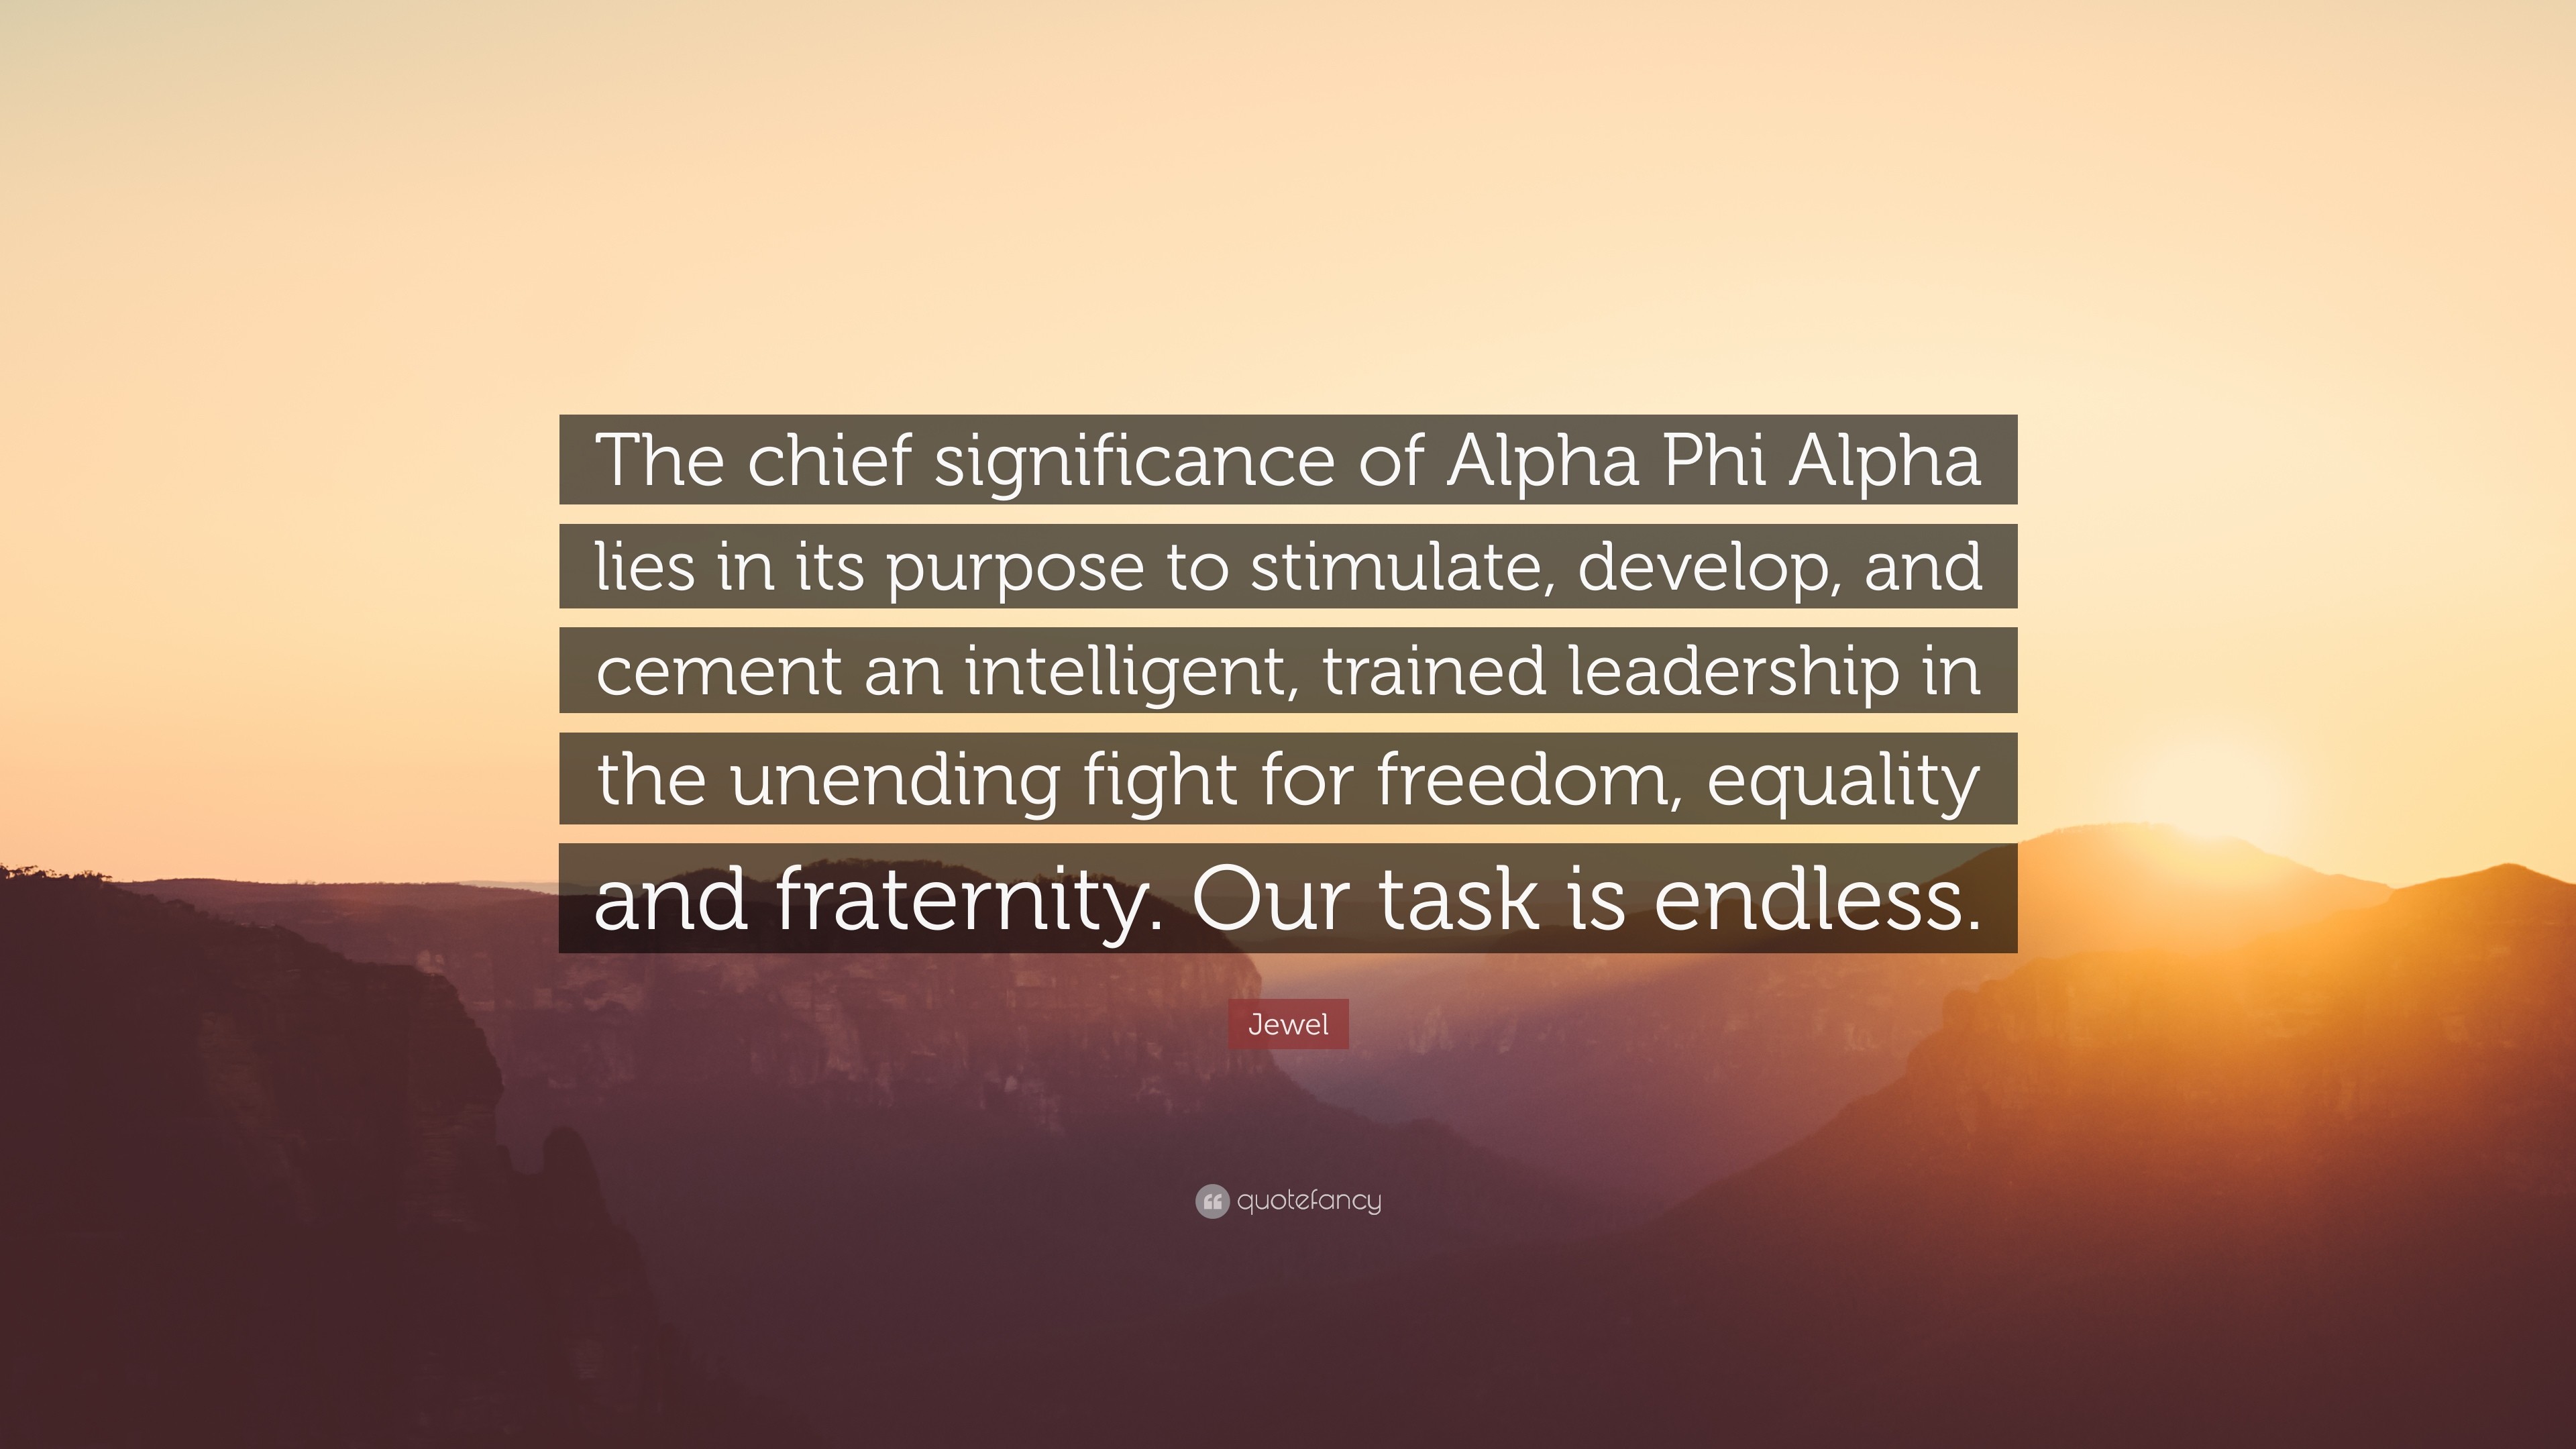 3840x2160 Jewel Quote: “The chief significance of Alpha Phi Alpha lies in its purpose  to